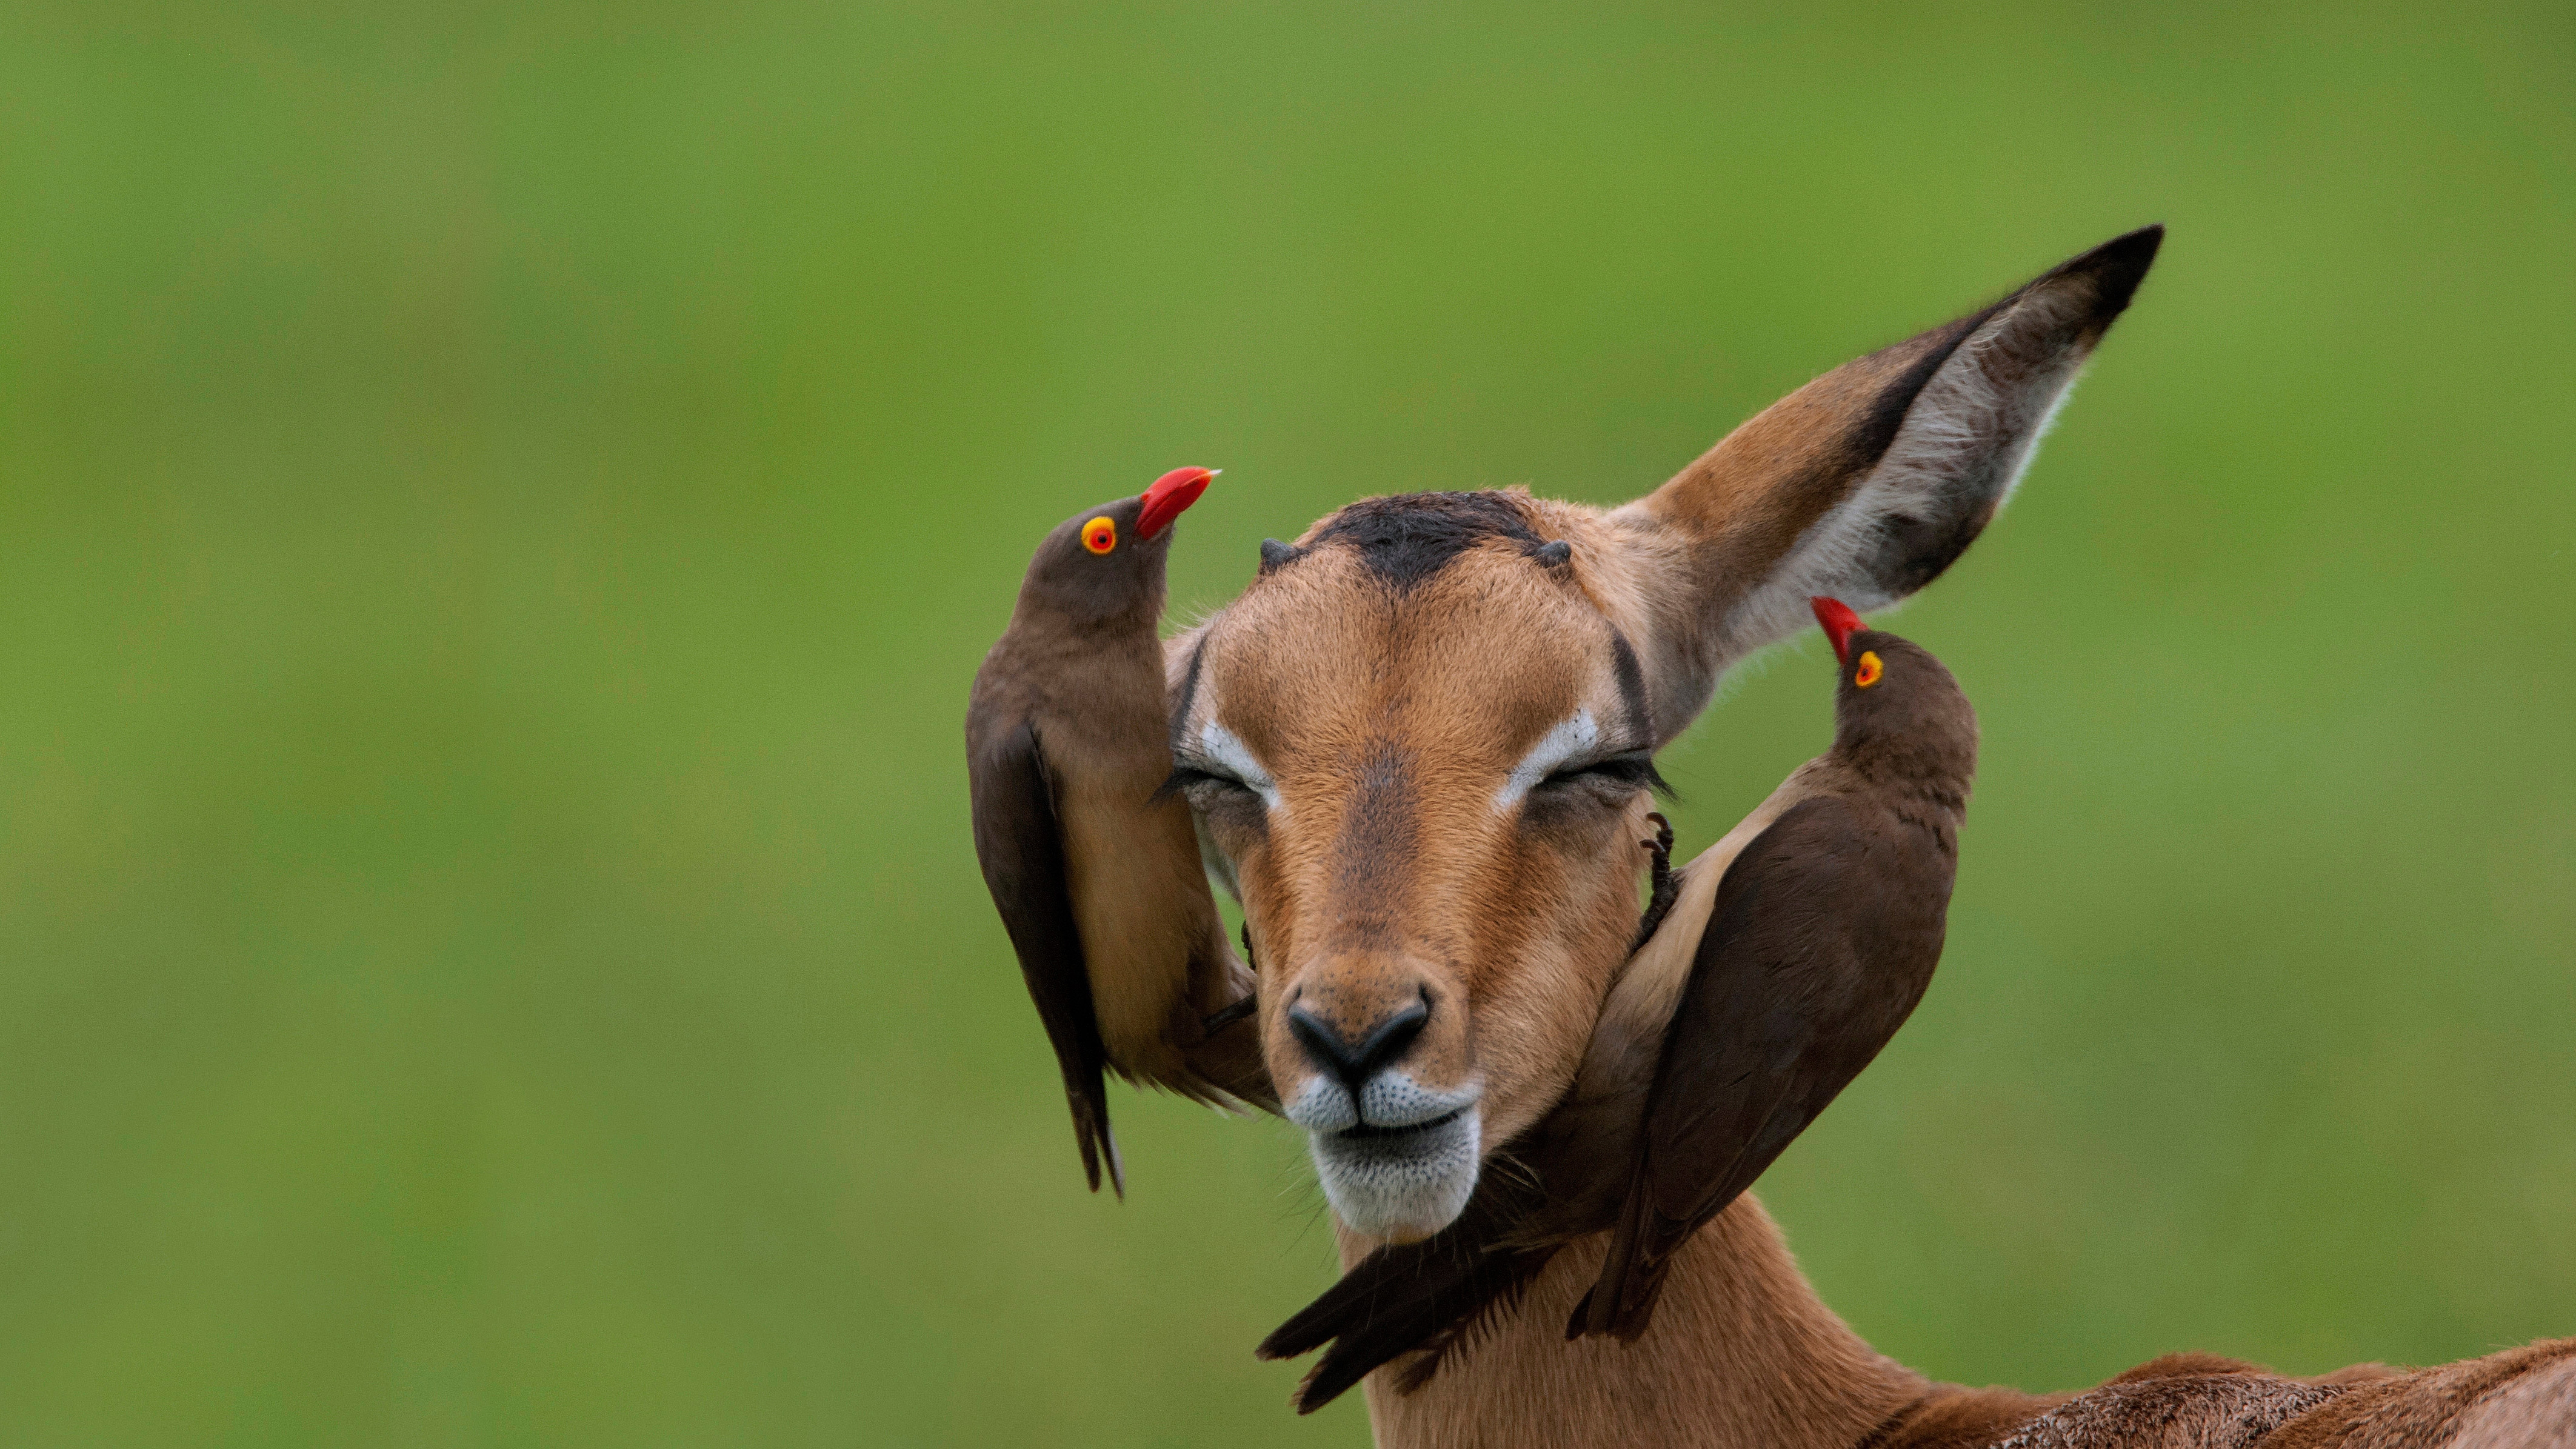 Red-billed oxpeckers on an impala in Mpumalanga, South Africa by Heini Wehrle